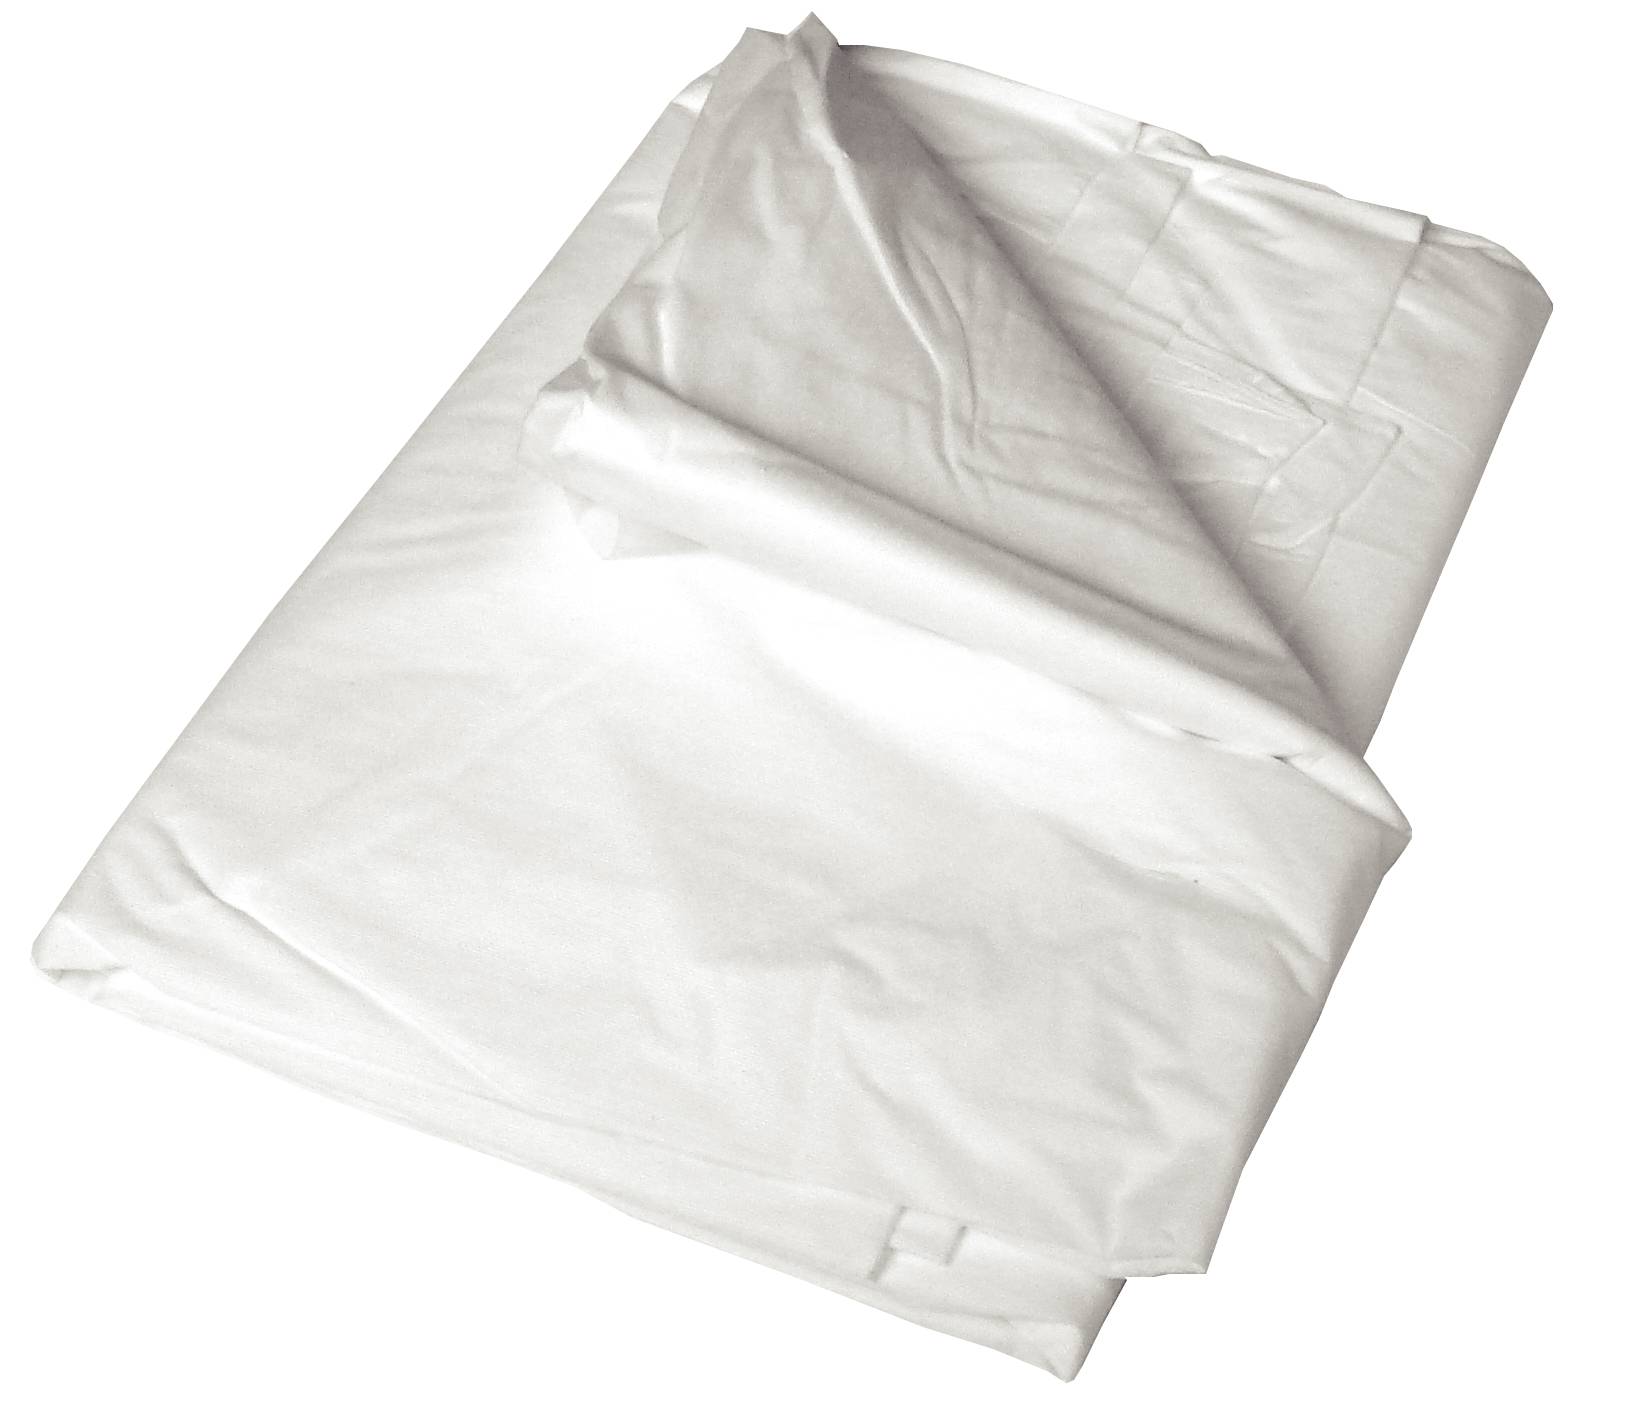 3.6m x 2.7m Paper Backed Polythene Dust Sheets